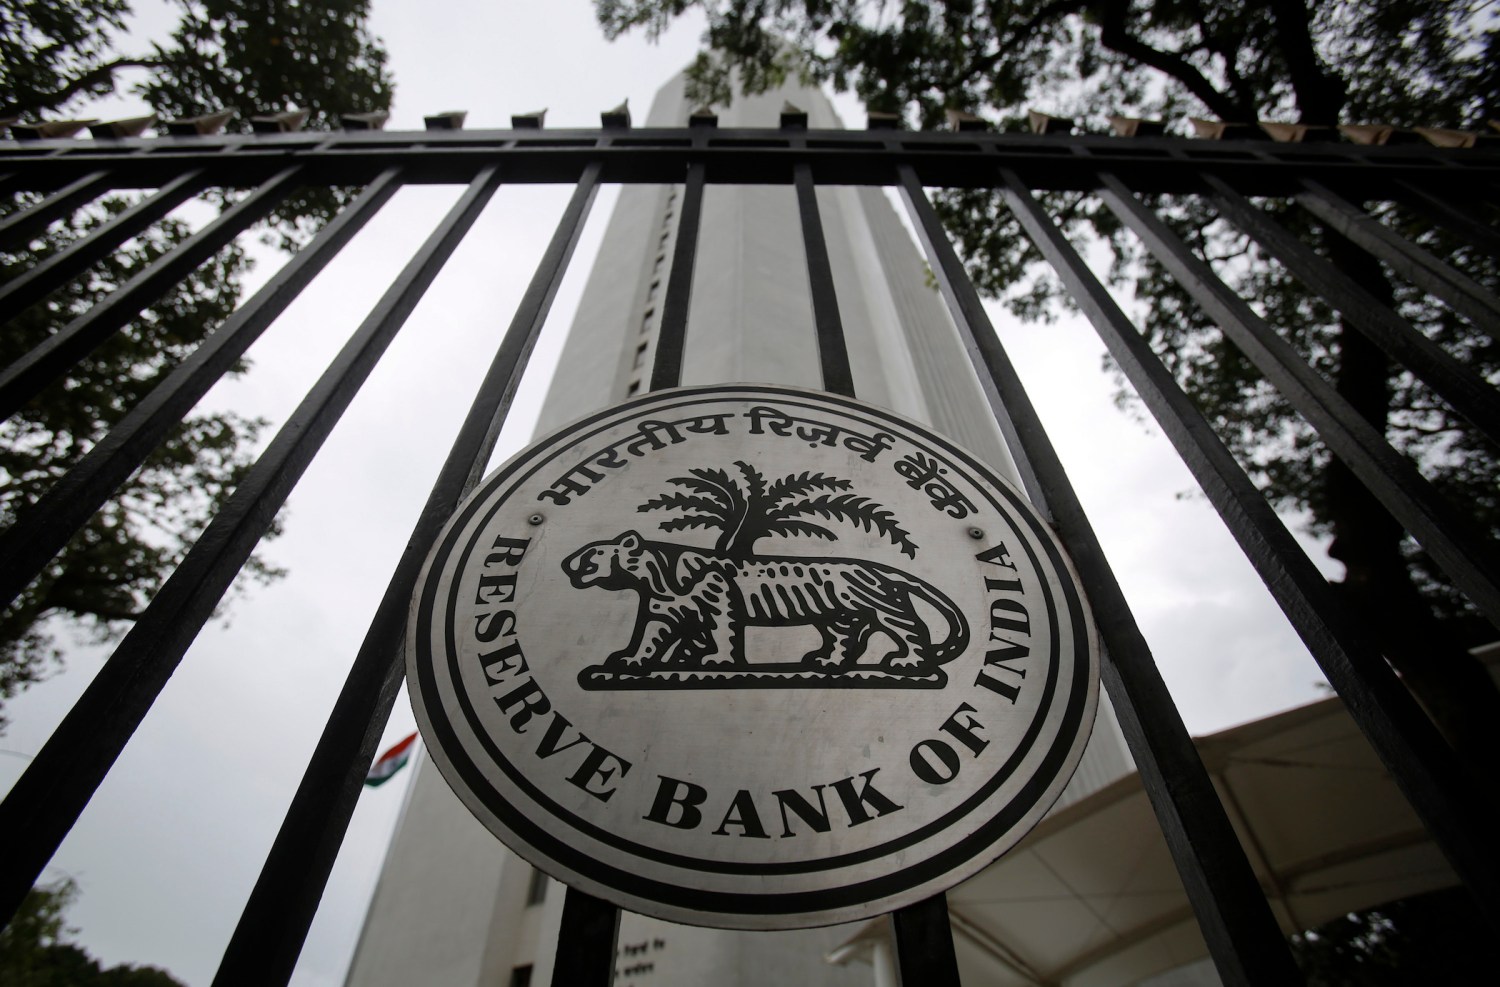 The Reserve Bank of India (RBI) seal is pictured on a gate outside the RBI headquarters in Mumbai July 30, 2013. India's central bank left interest rates unchanged on Tuesday as it supports a battered rupee but said it will roll back recent liquidity tightening measures when stability returns to the currency market, enabling it to resume supporting growth.  REUTERS/Vivek Prakash (INDIA - Tags: BUSINESS LOGO) - GM1E97U14PK01